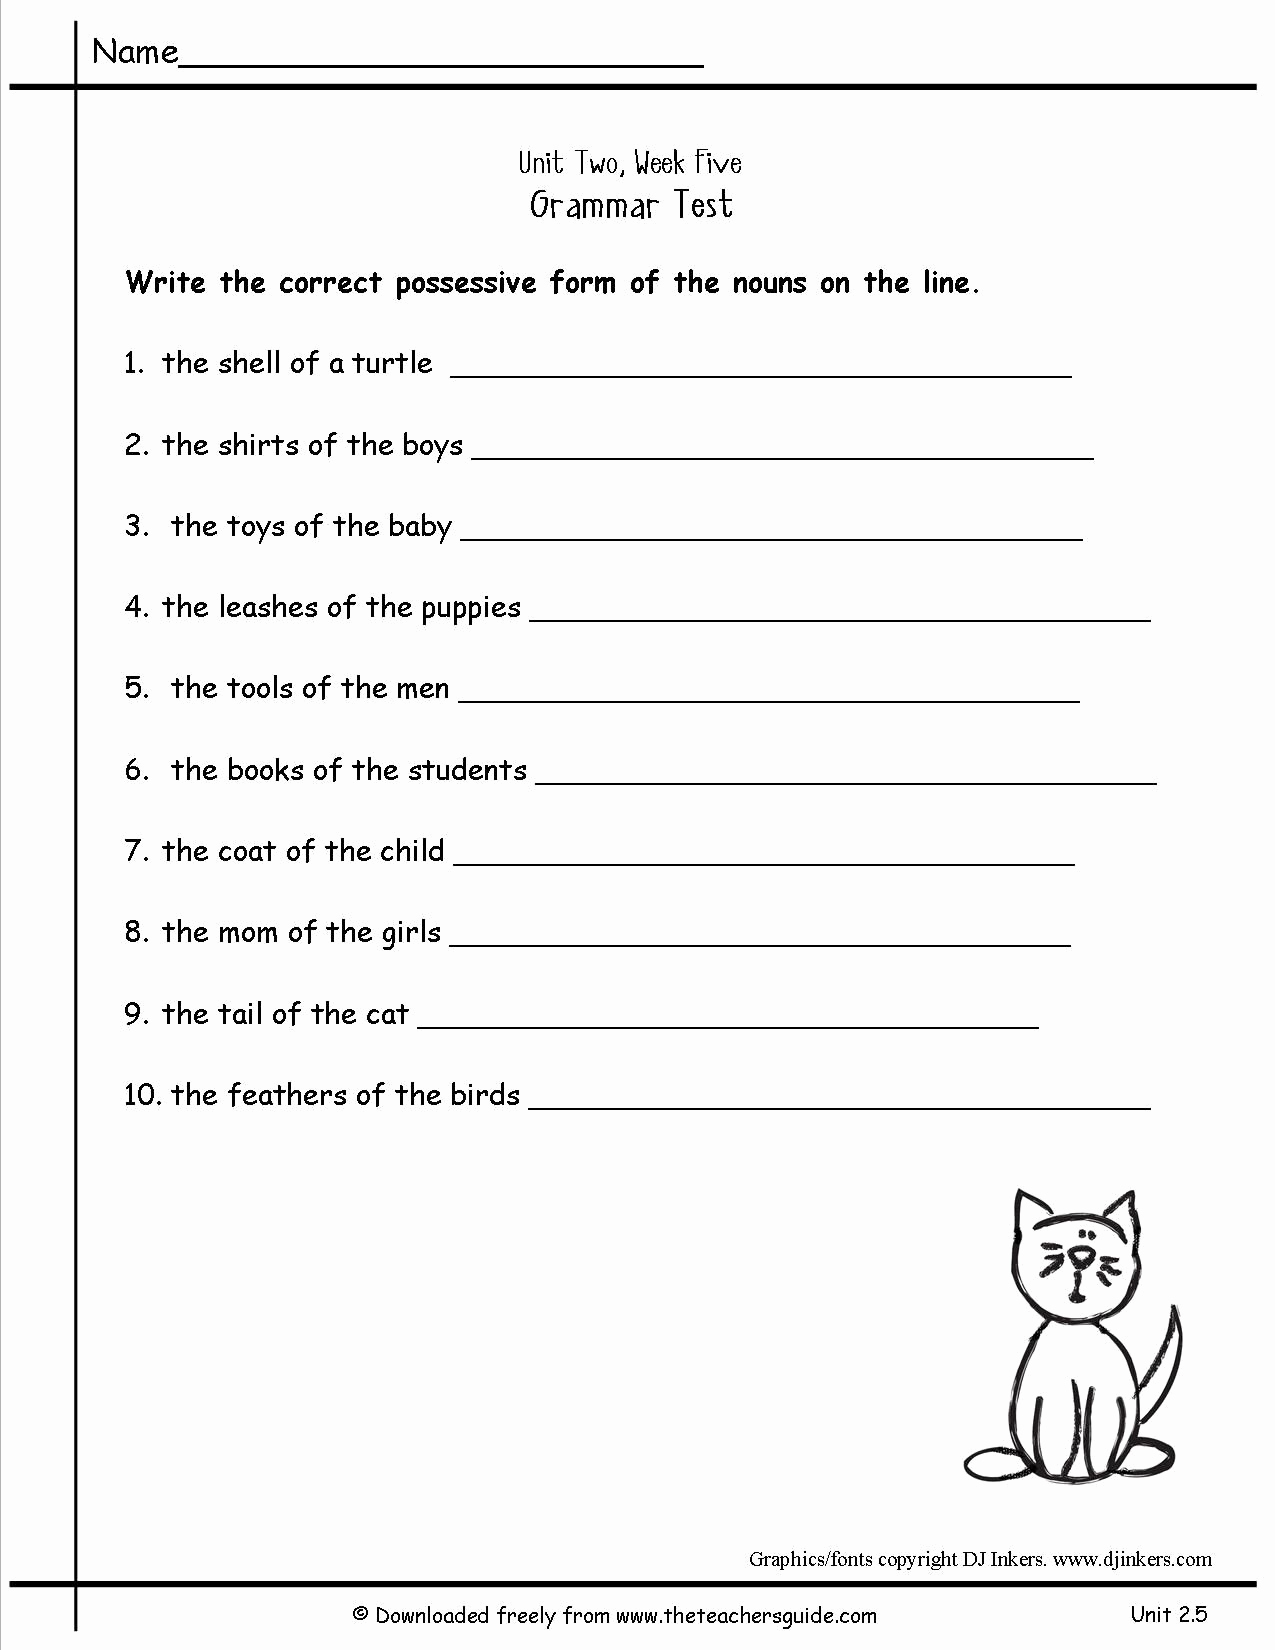 Pronoun Worksheets Second Grade Lovely 2nd Grade Pronoun Worksheets Free Pronoun Worksheet for